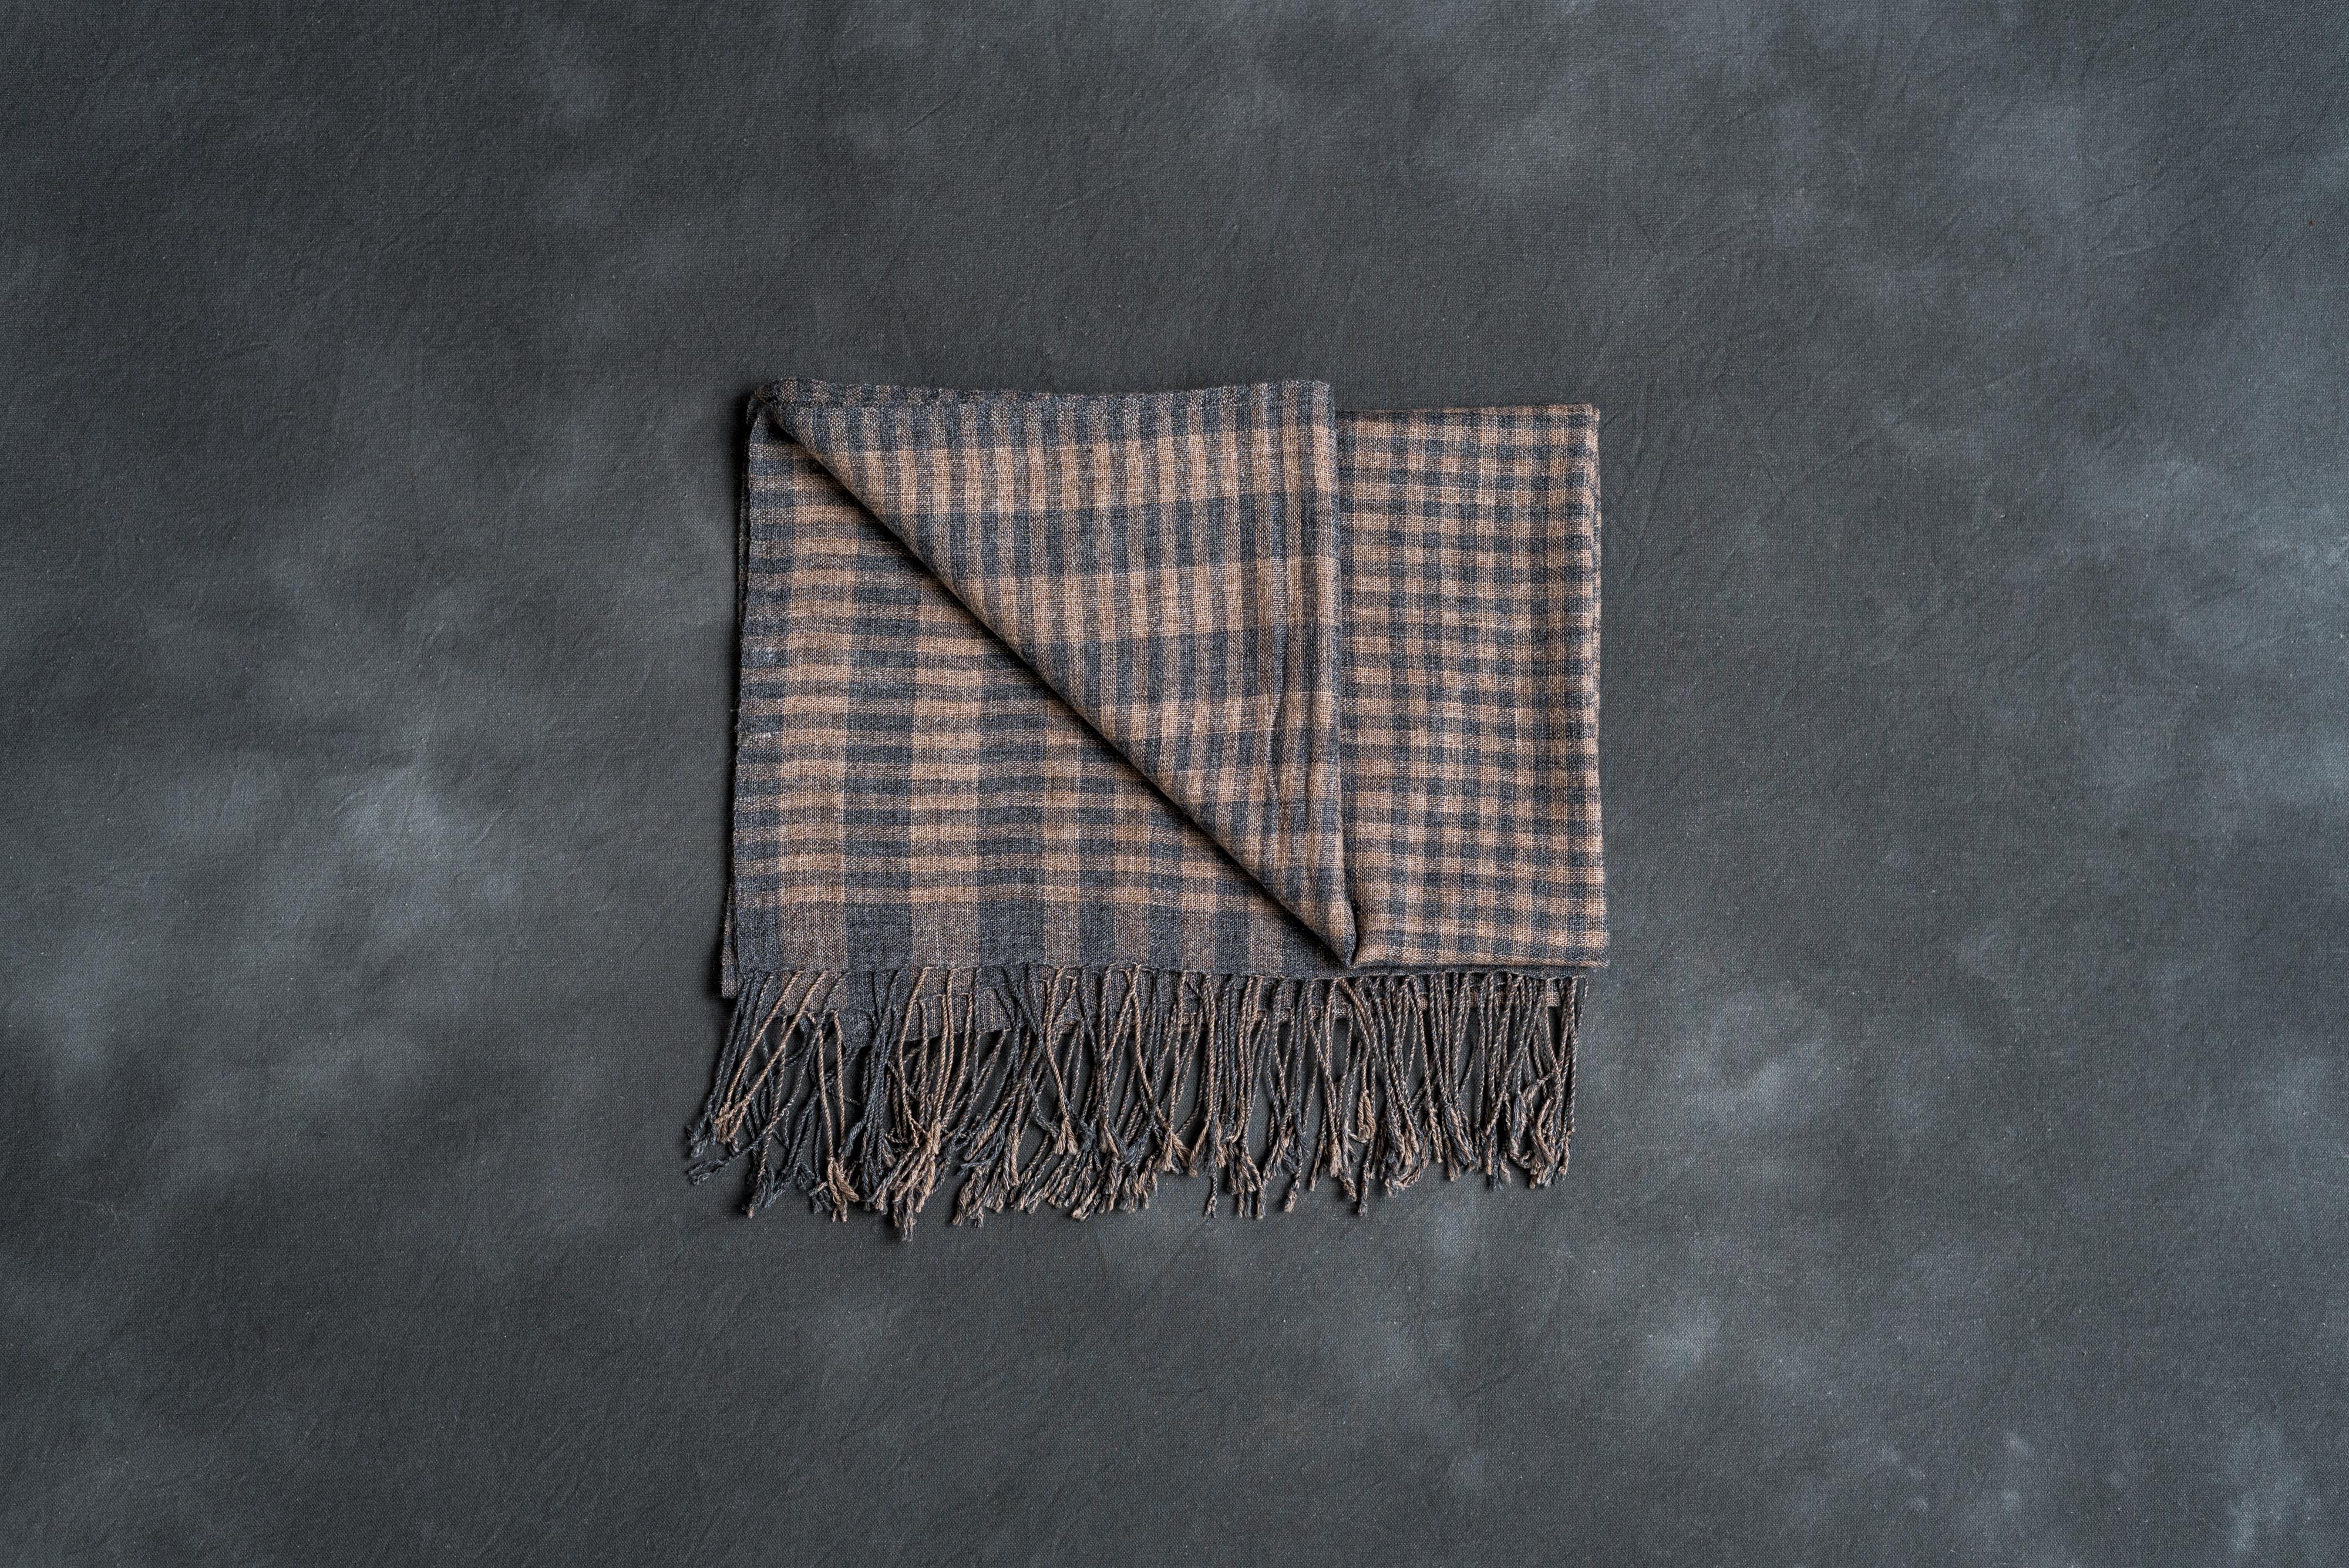 Custom design by Studio Variously, Fawn is a carefully handwoven piece made by artisans in Nepal.

A sustainable design brand based out of Michigan, Studio Variously exclusively collaborates with artisan communities to restore & revive ancient